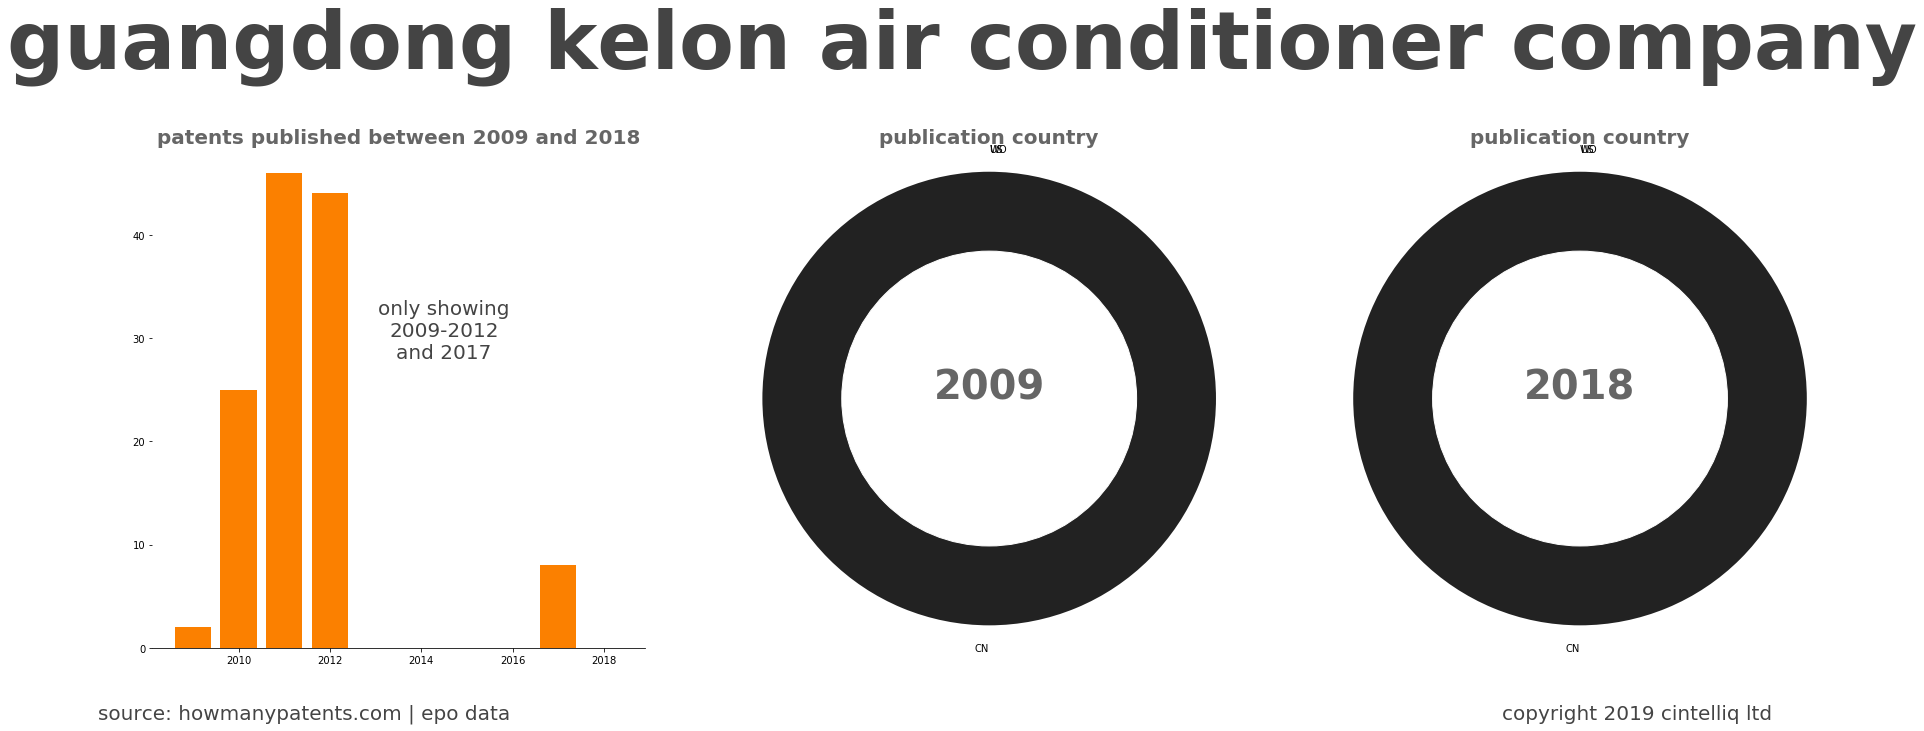 summary of patents for Guangdong Kelon Air Conditioner Company